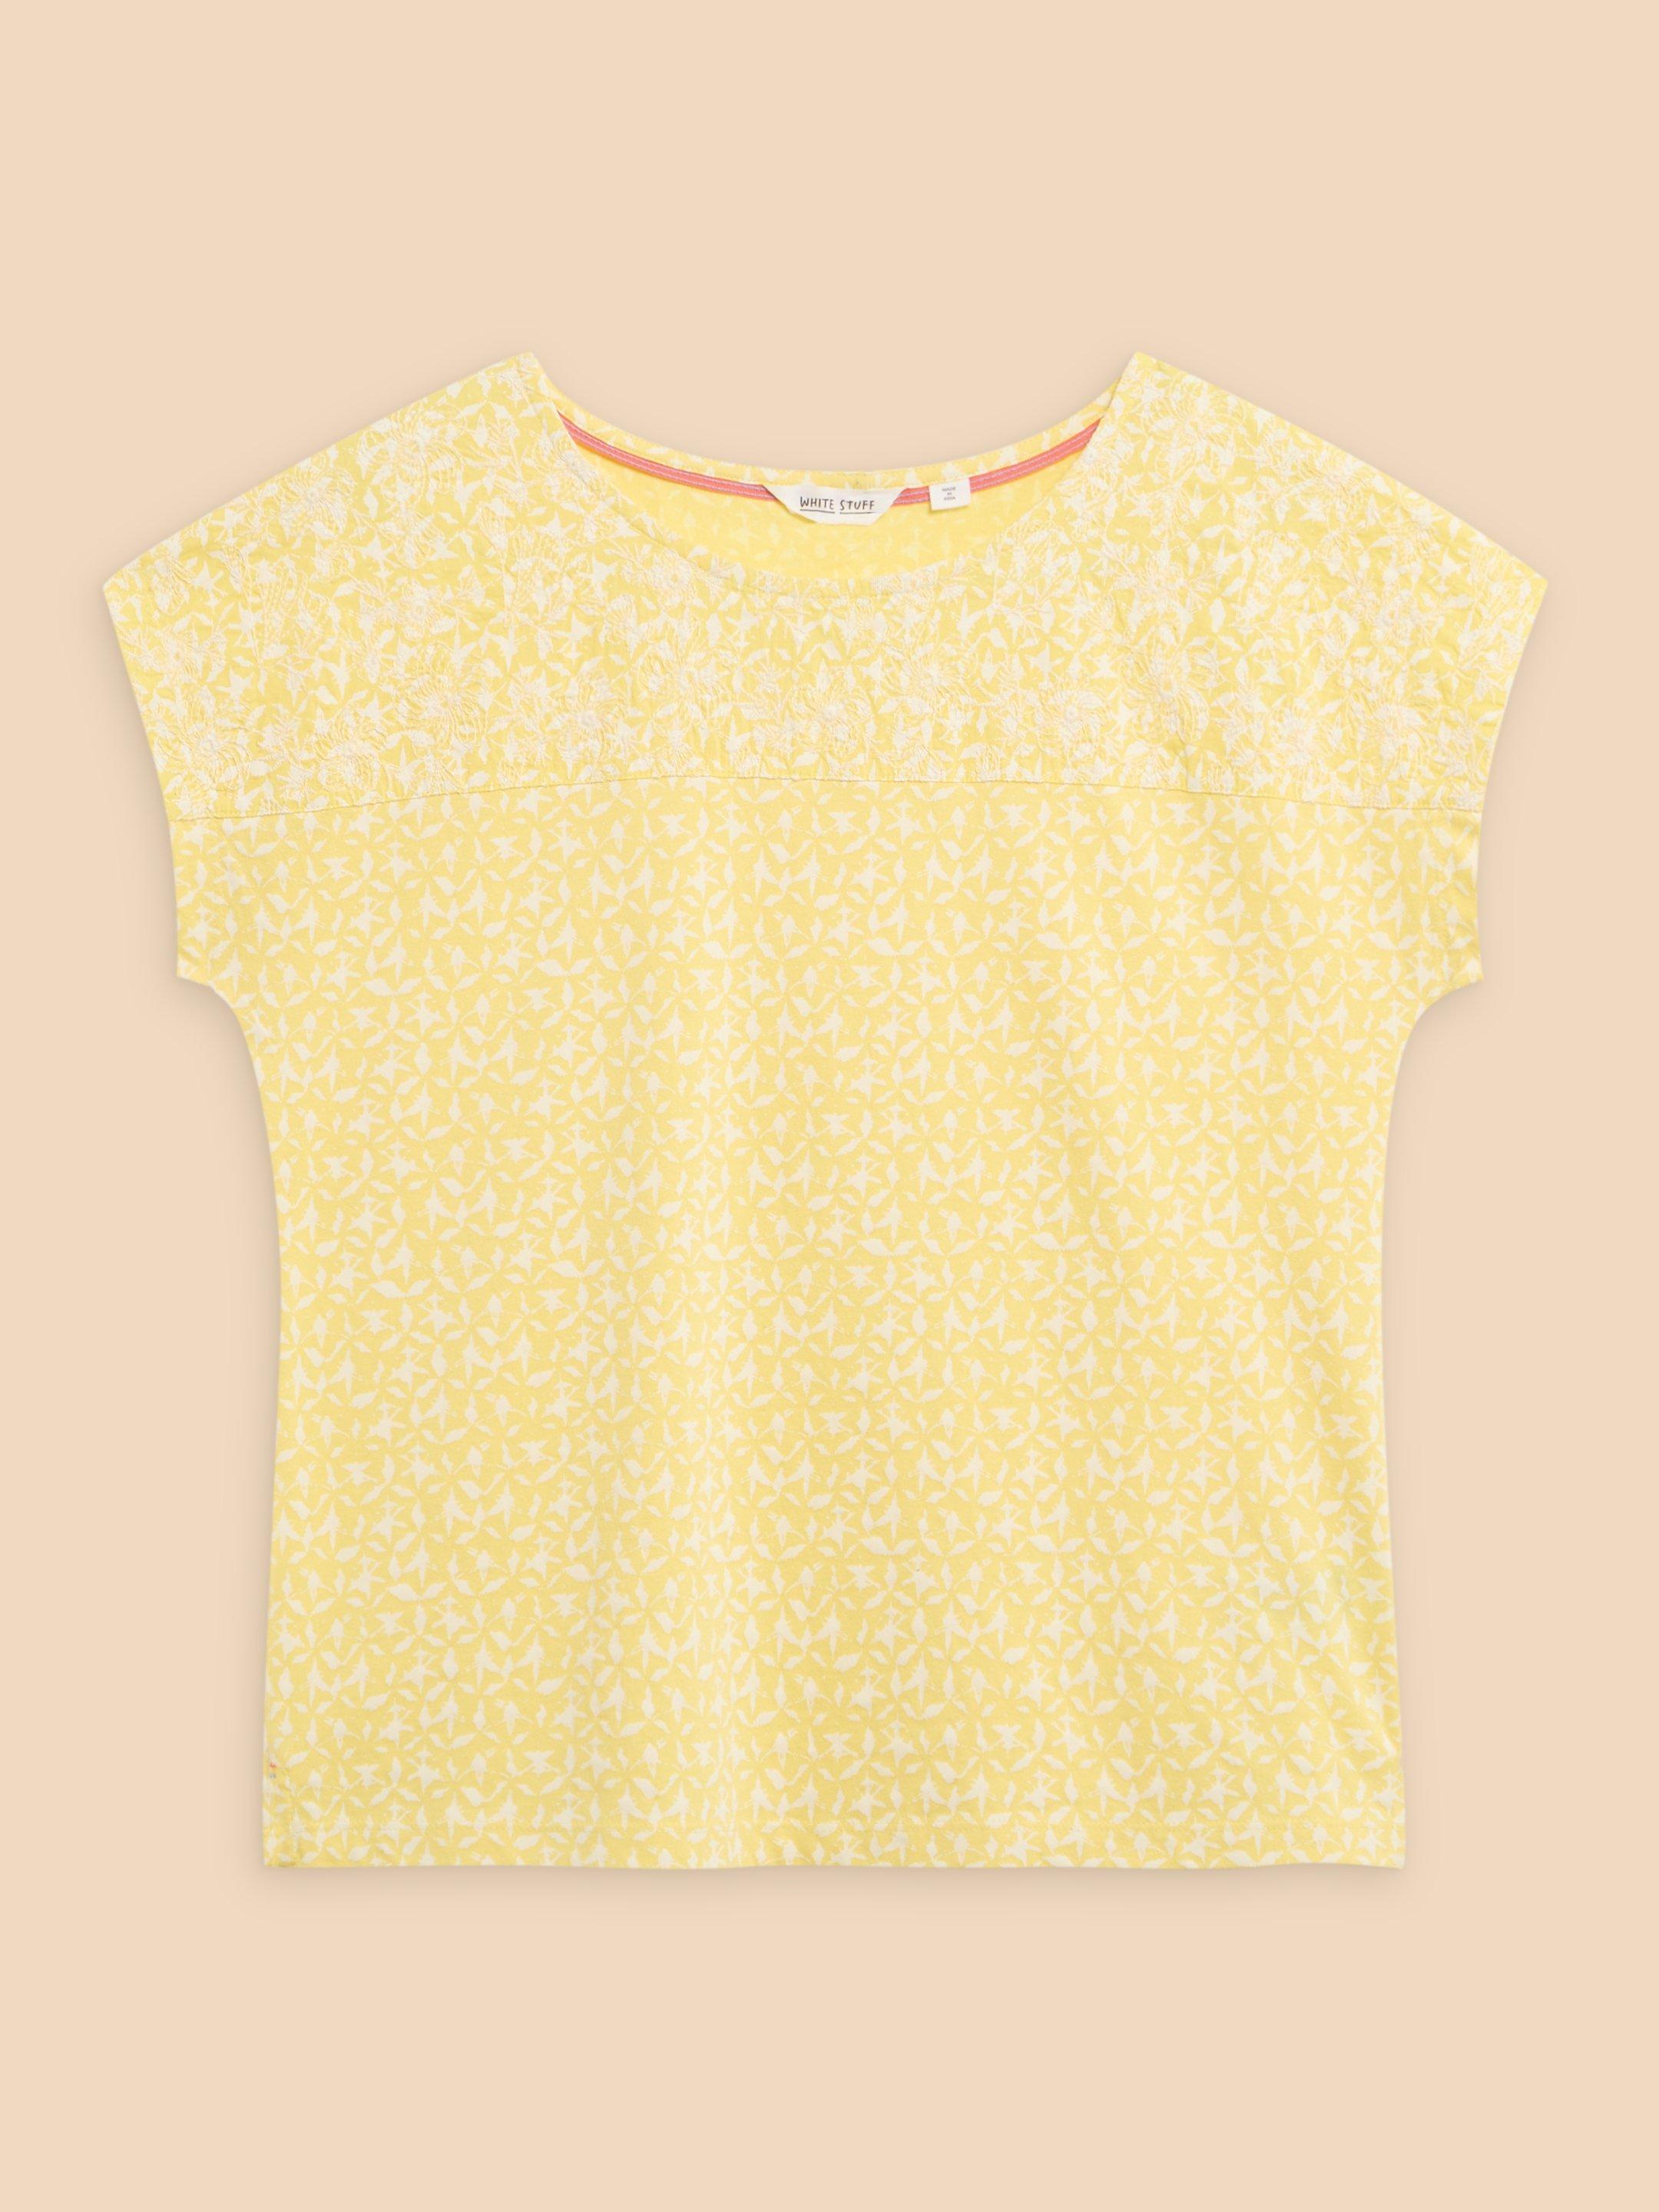 ANTHEA EMBROIDERY SHORT SLEEVE TOP in YELLOW PR - FLAT FRONT